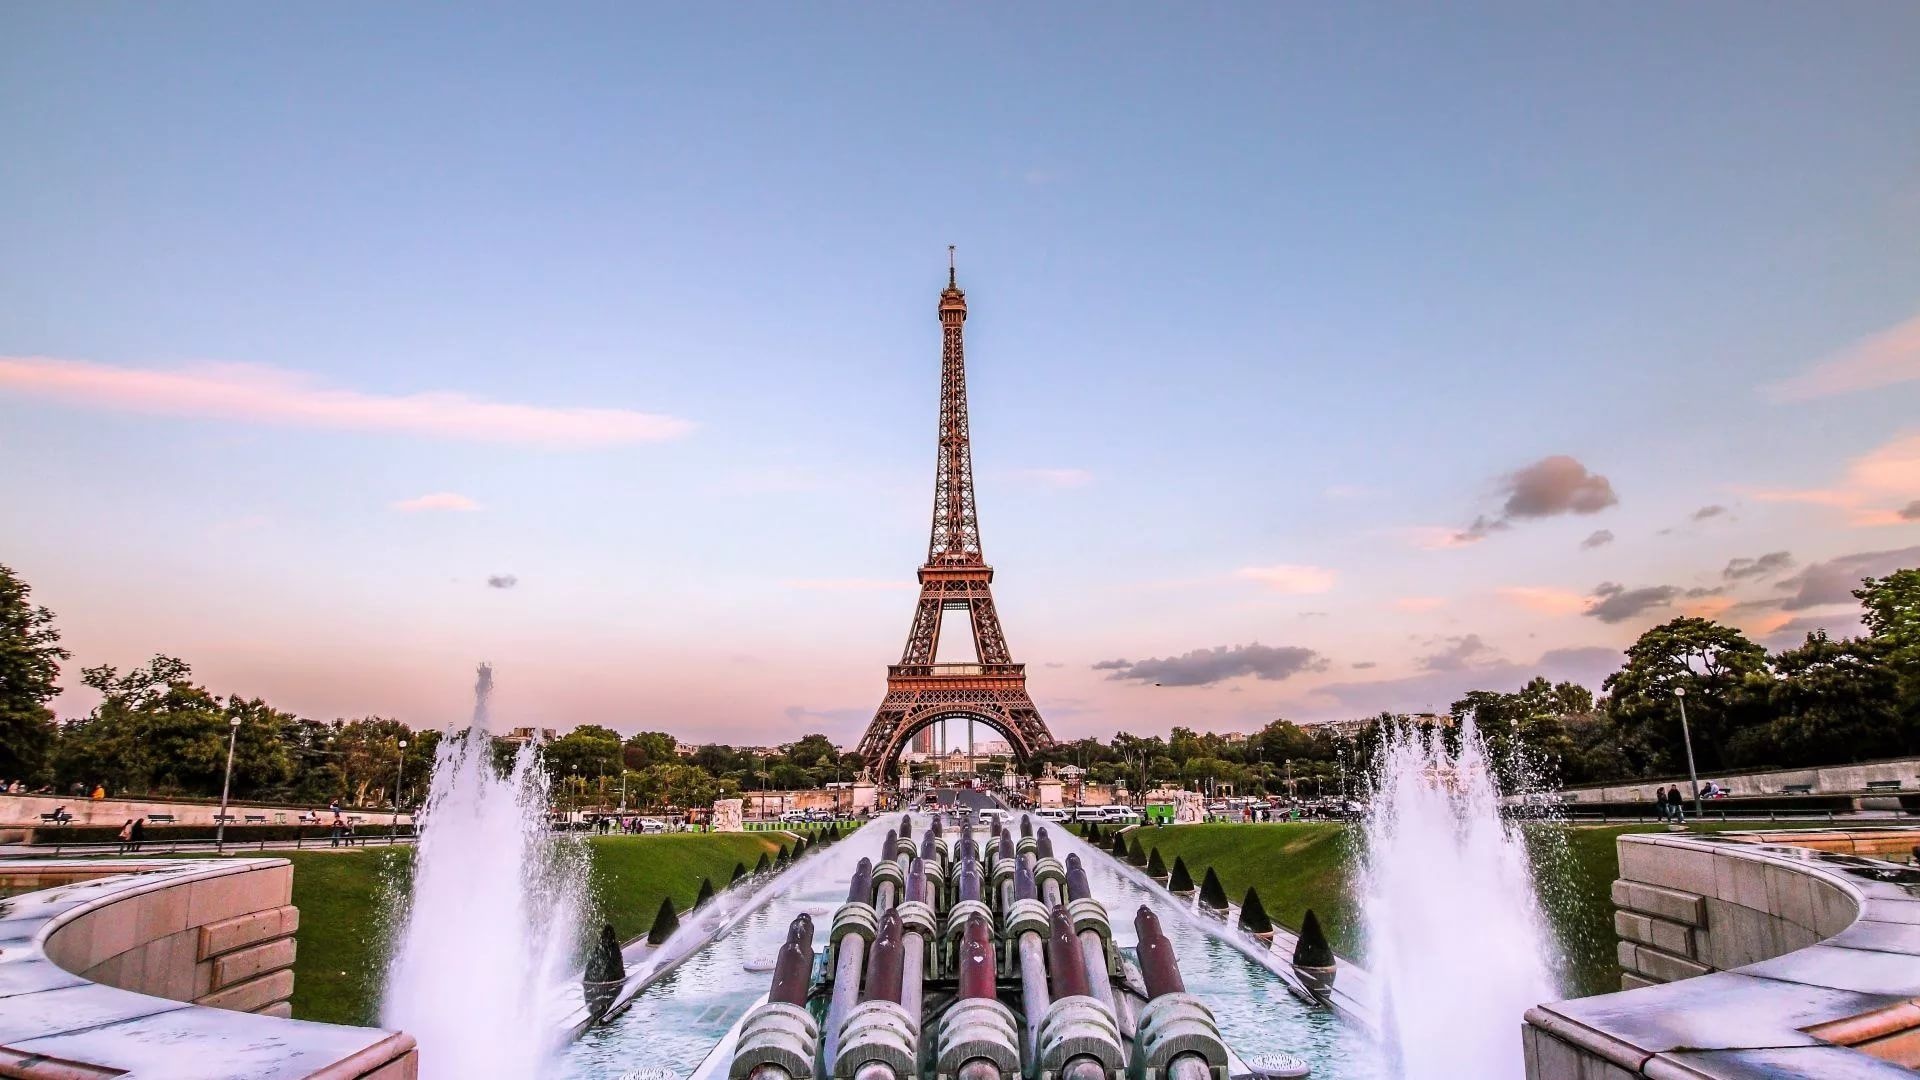 Paris: The French historic, political and economic capital. 1920x1080 Full HD Wallpaper.